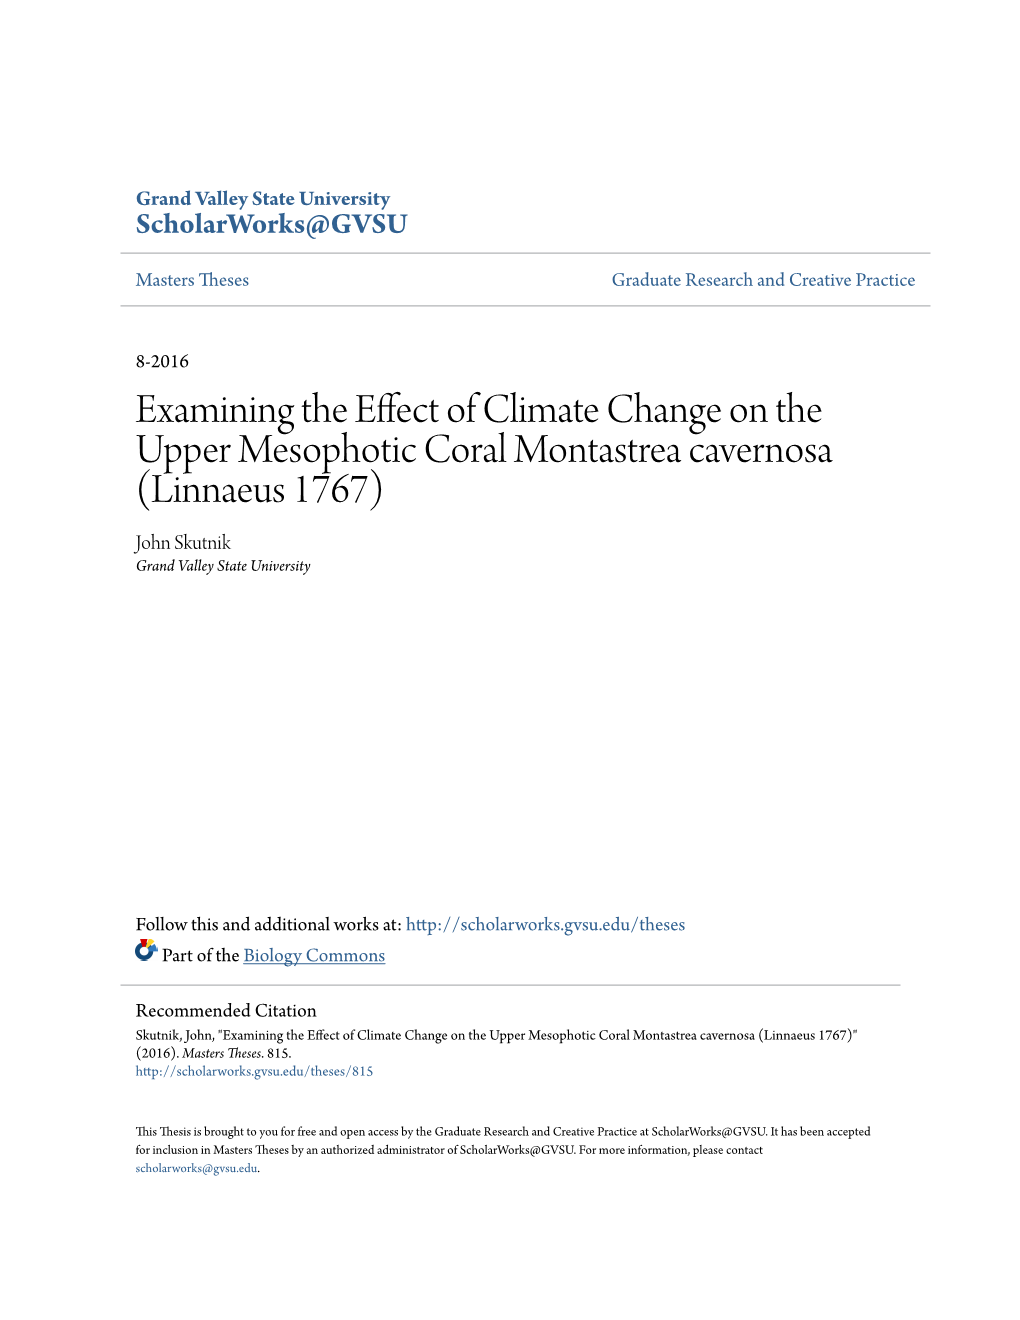 Examining the Effect of Climate Change on the Upper Mesophotic Coral Montastrea Cavernosa (Linnaeus 1767) John Skutnik Grand Valley State University